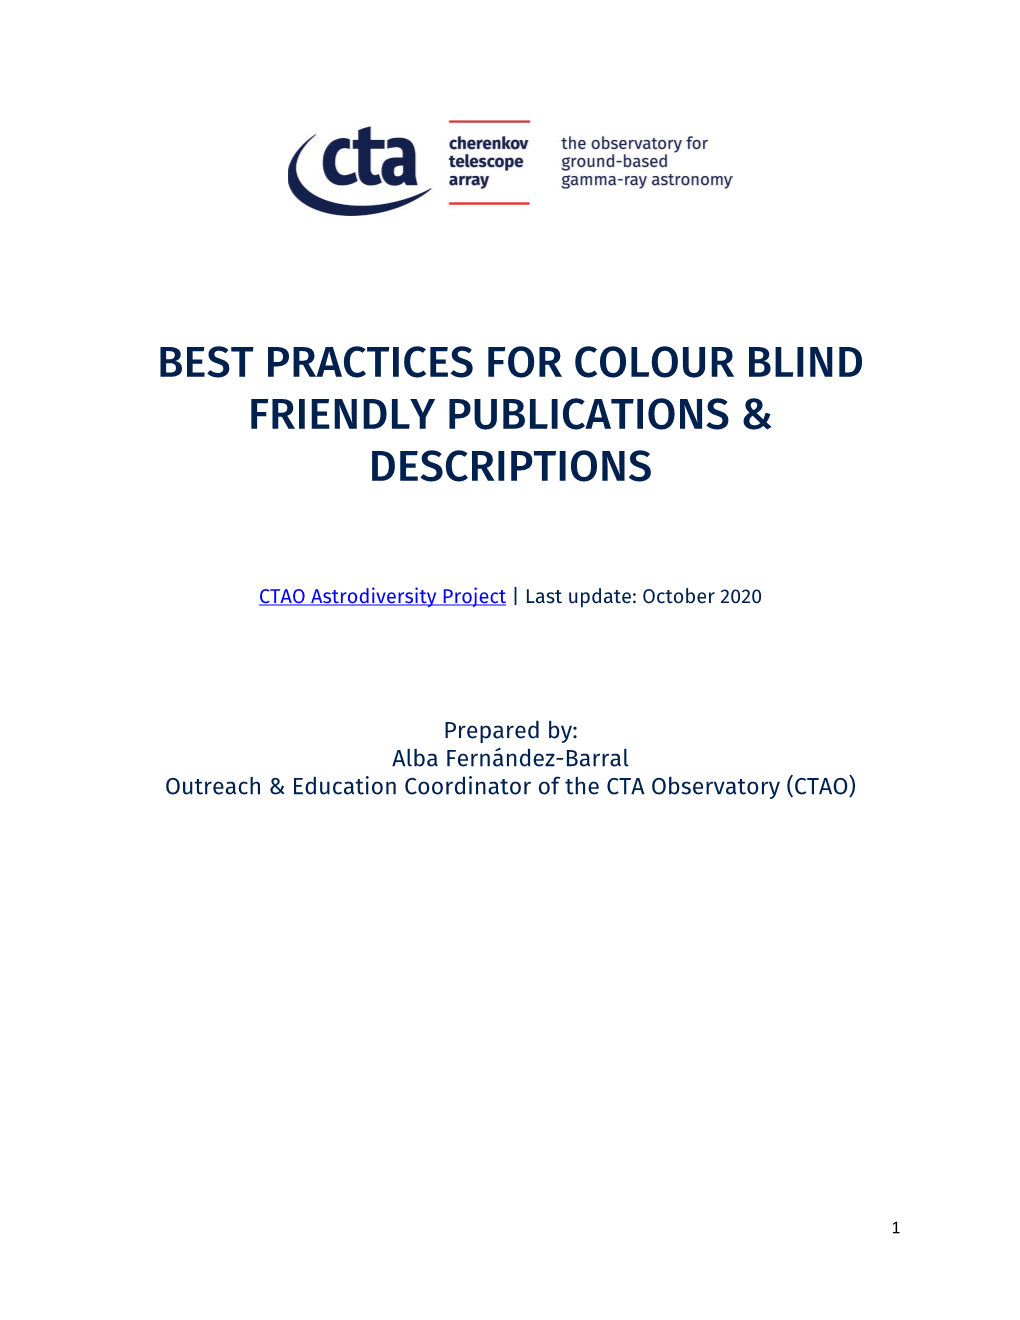 CTA's Best Practices for Colour Blind Friendly Publications And